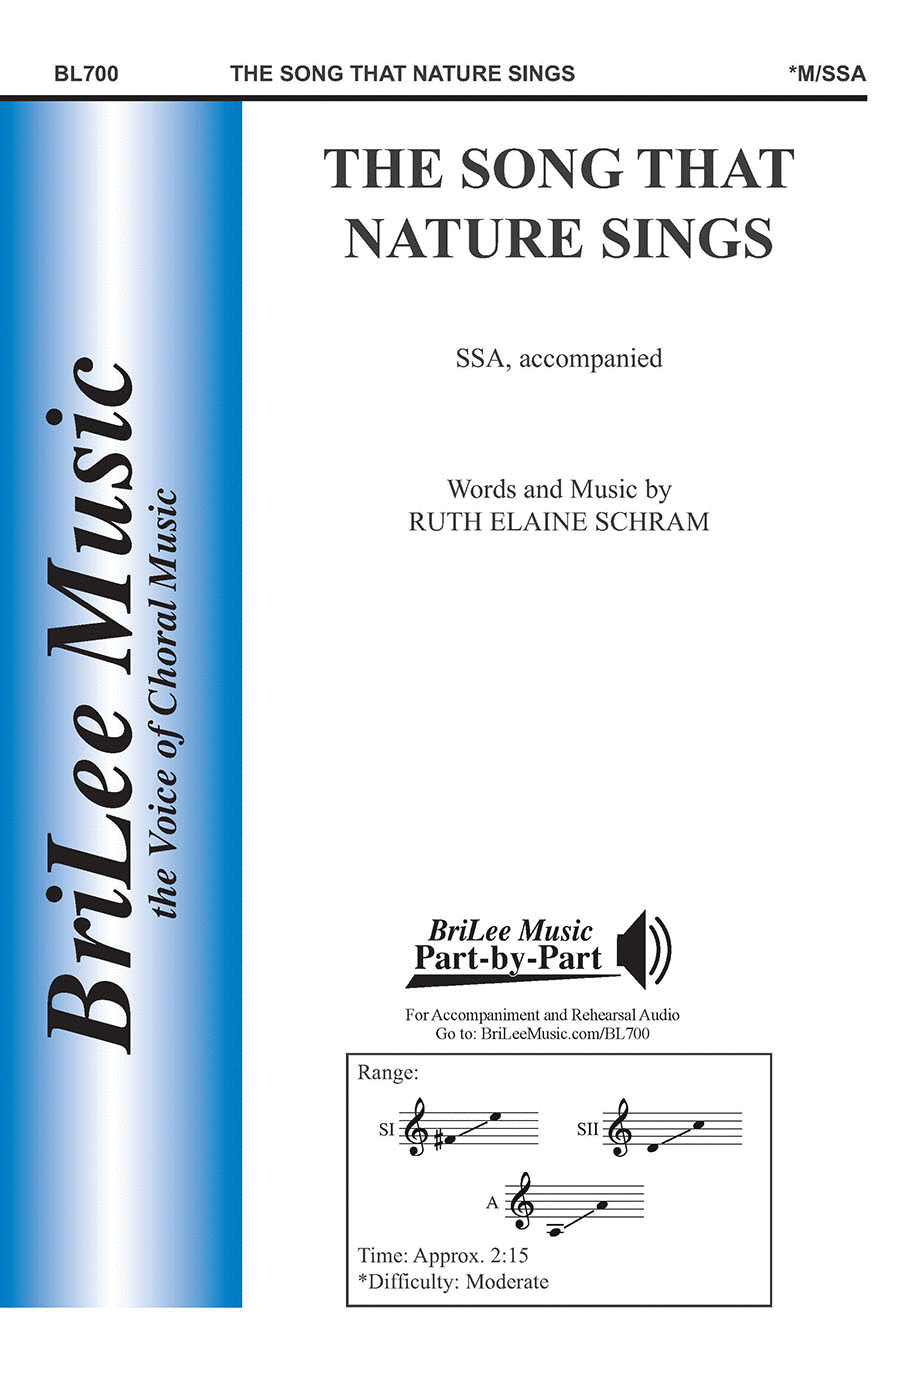 The Song That Nature Sings